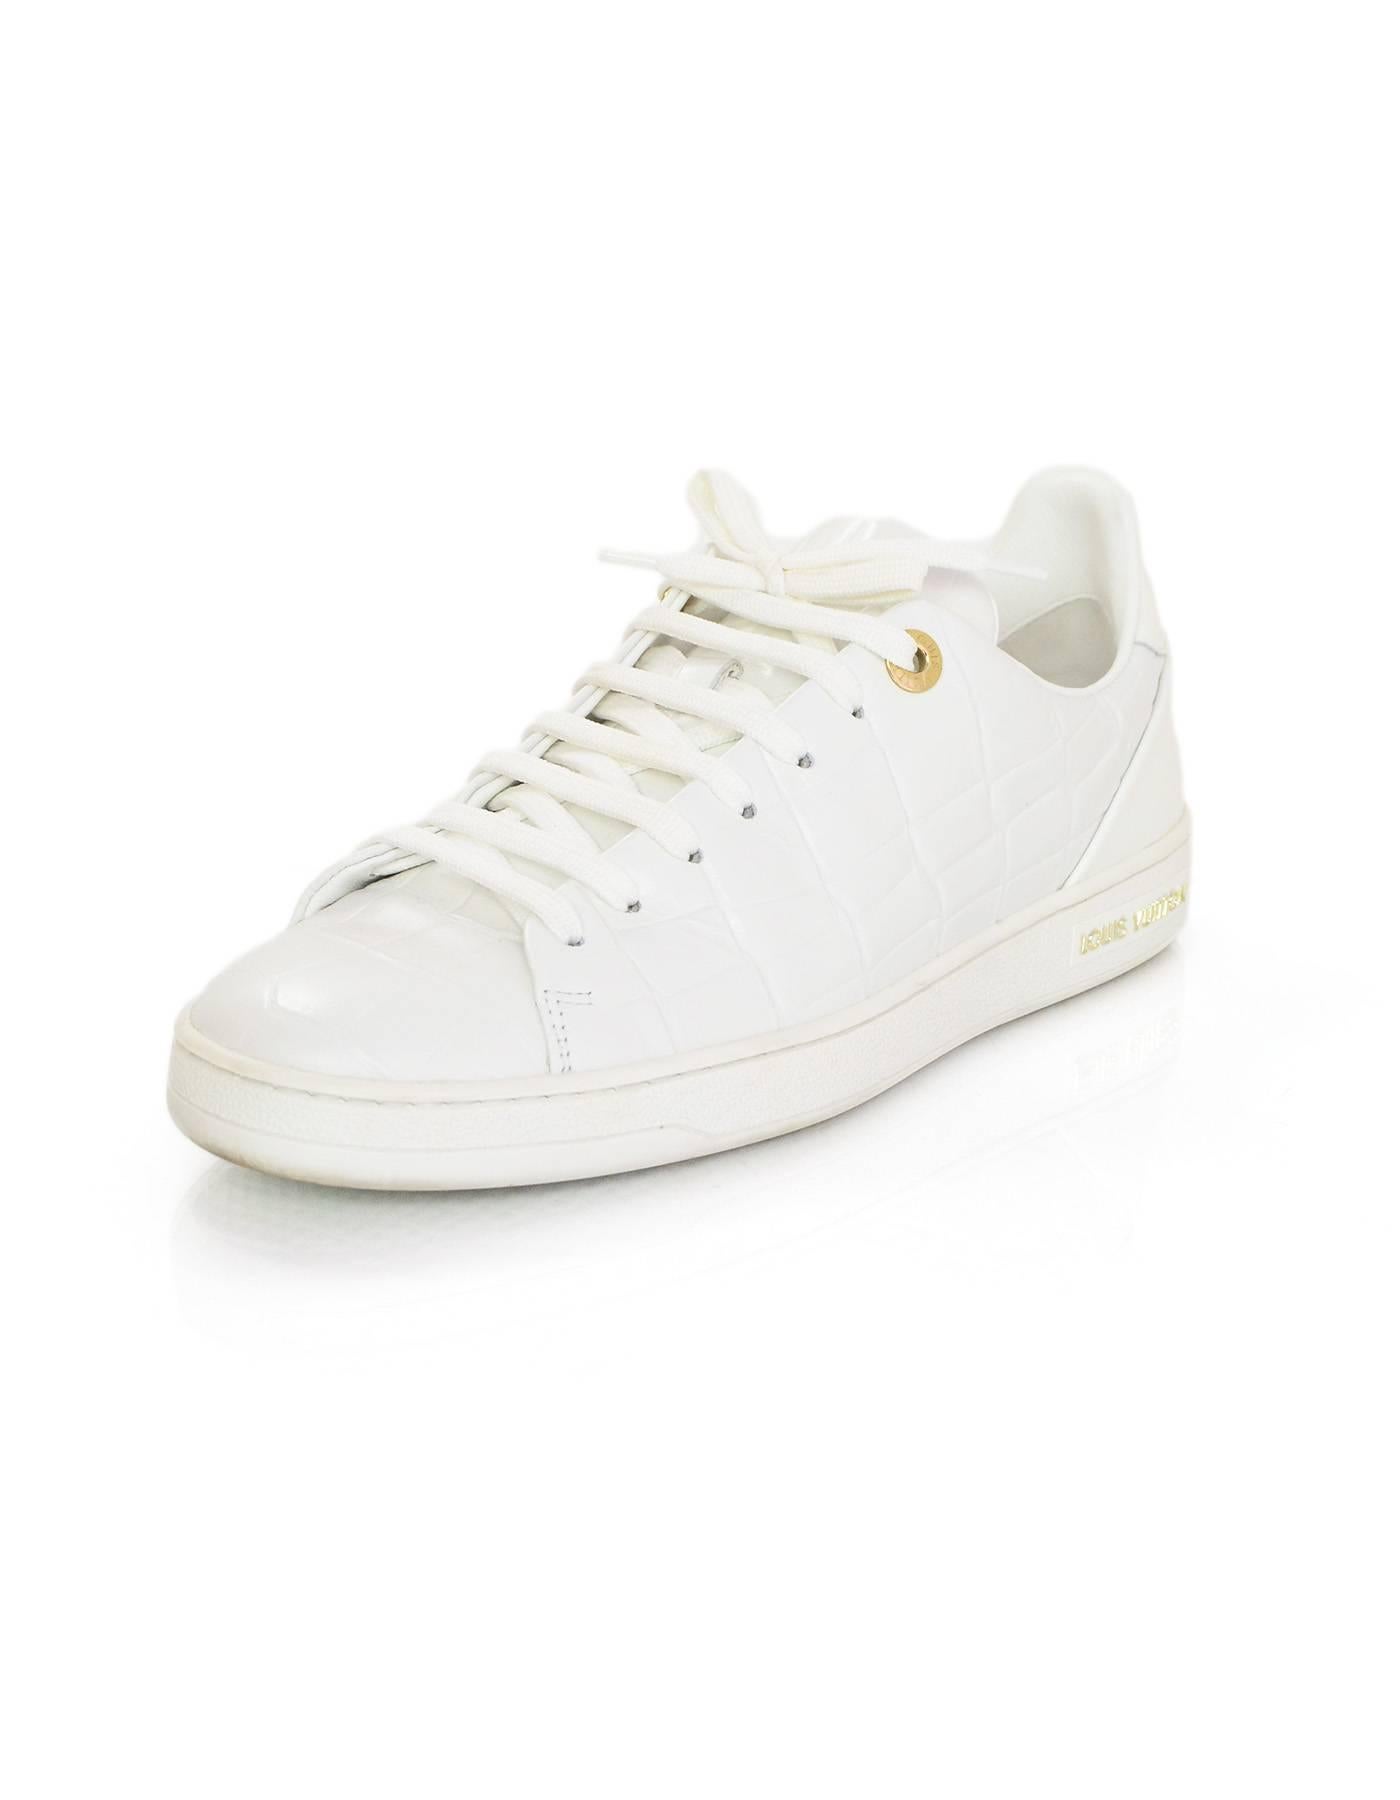 Louis Vuitton White Embossed Frontrow Sneakers Sz 38.5
Features embossed crocodile leather

Color: White
Materials: Leather, rubber
Closure/Opening: Lace tie closure
Sole Stamp: Louis Vuitton Paris
Retail Price: $680 + tax
Overall Condition: